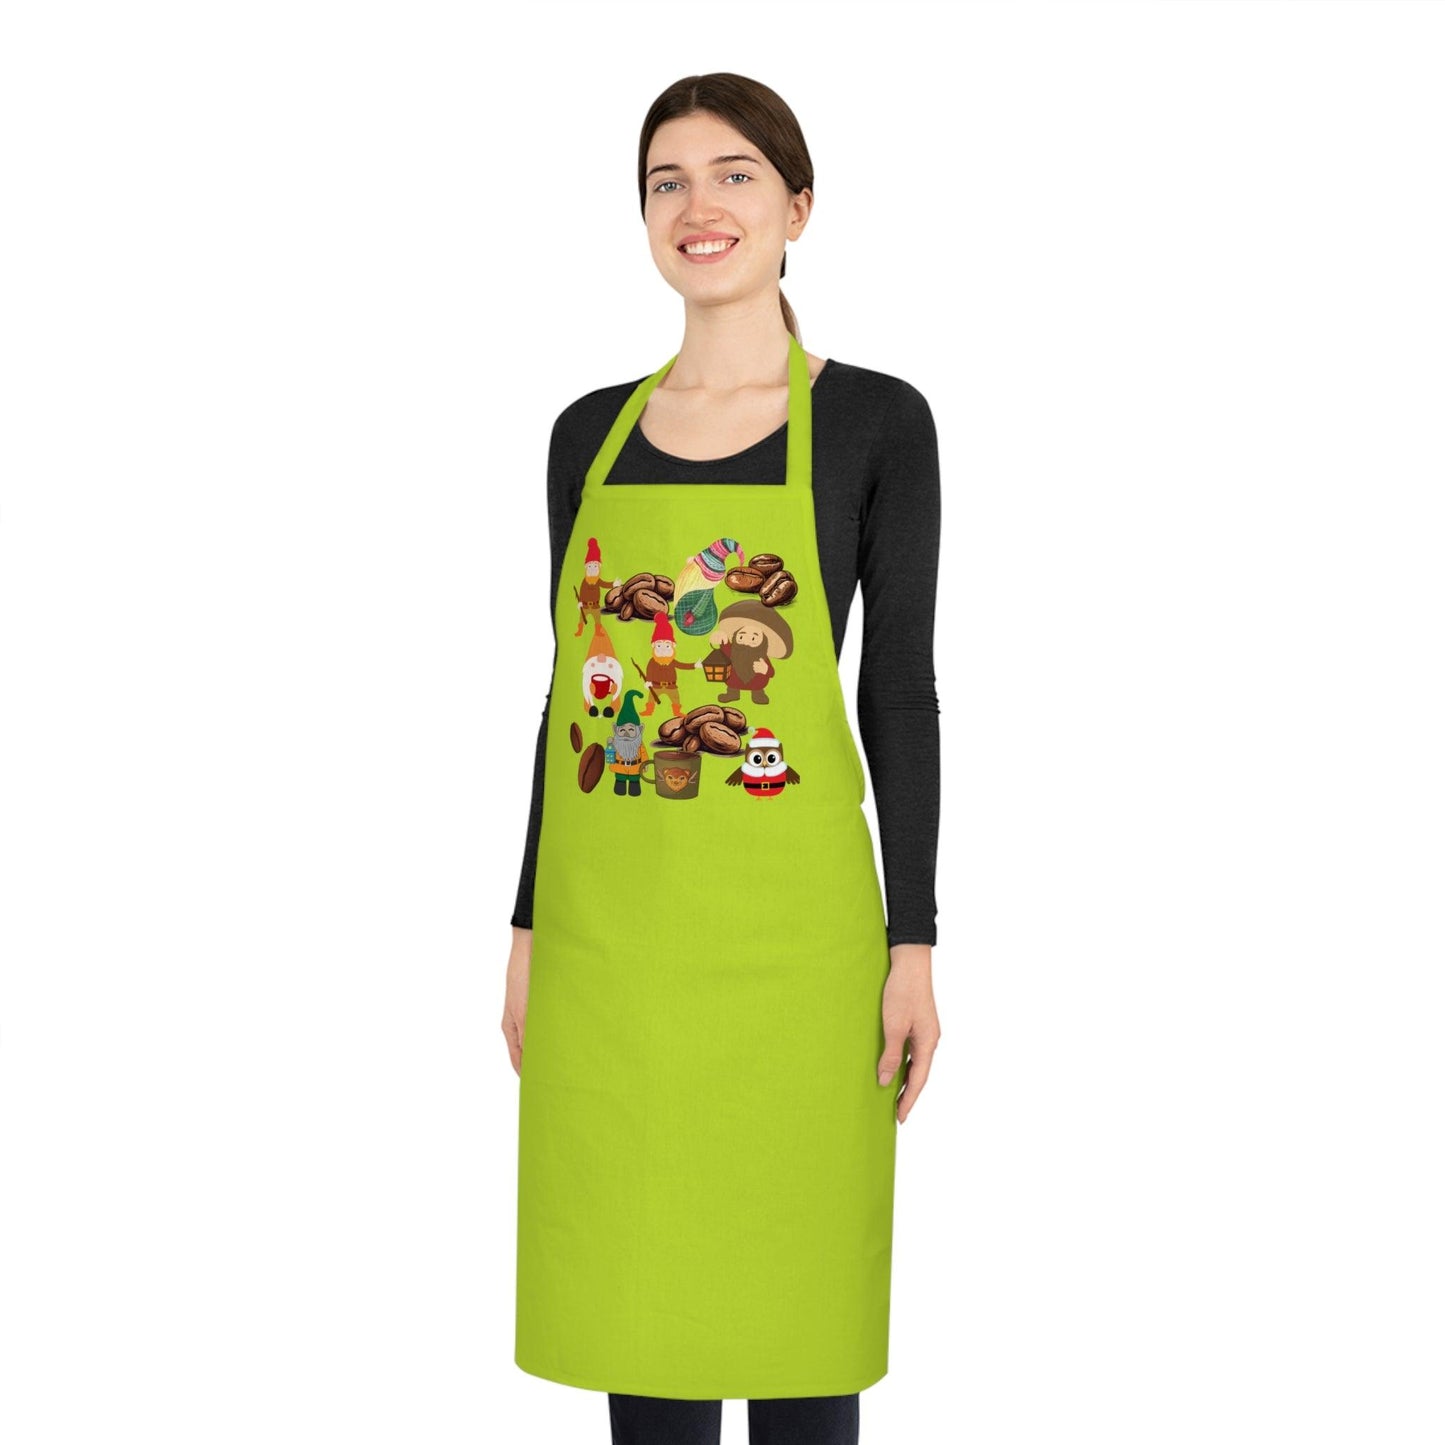 Adult Gnome Cooking & BBQ Apron - COFFEEBRE